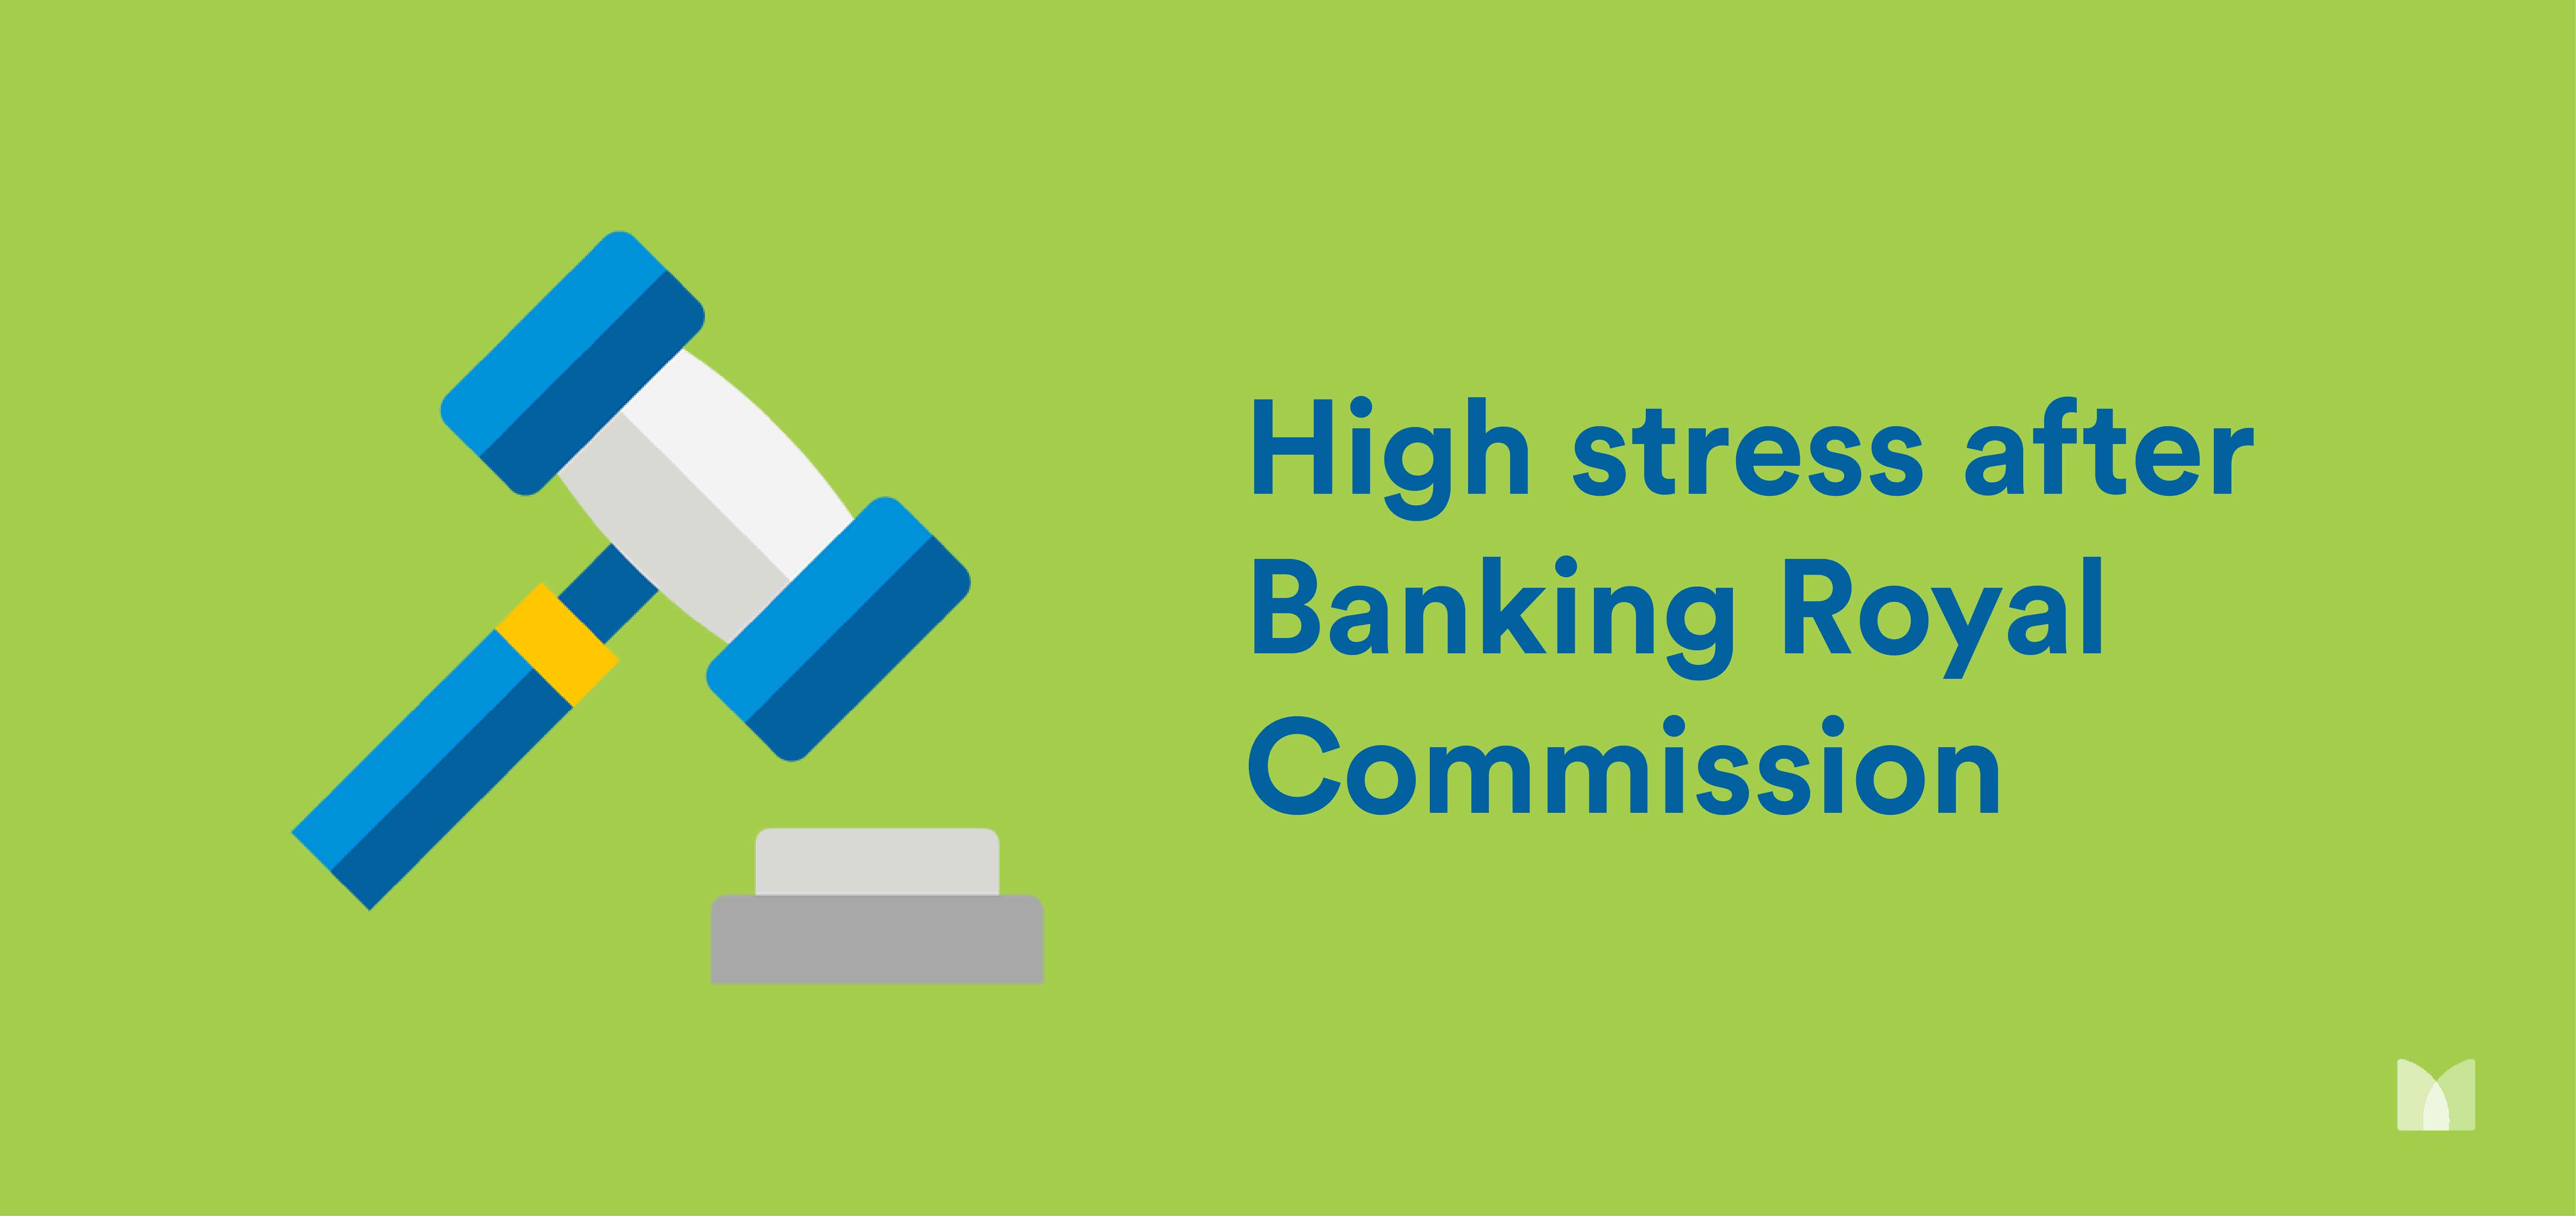 High stress after the Banking Royal Commission 